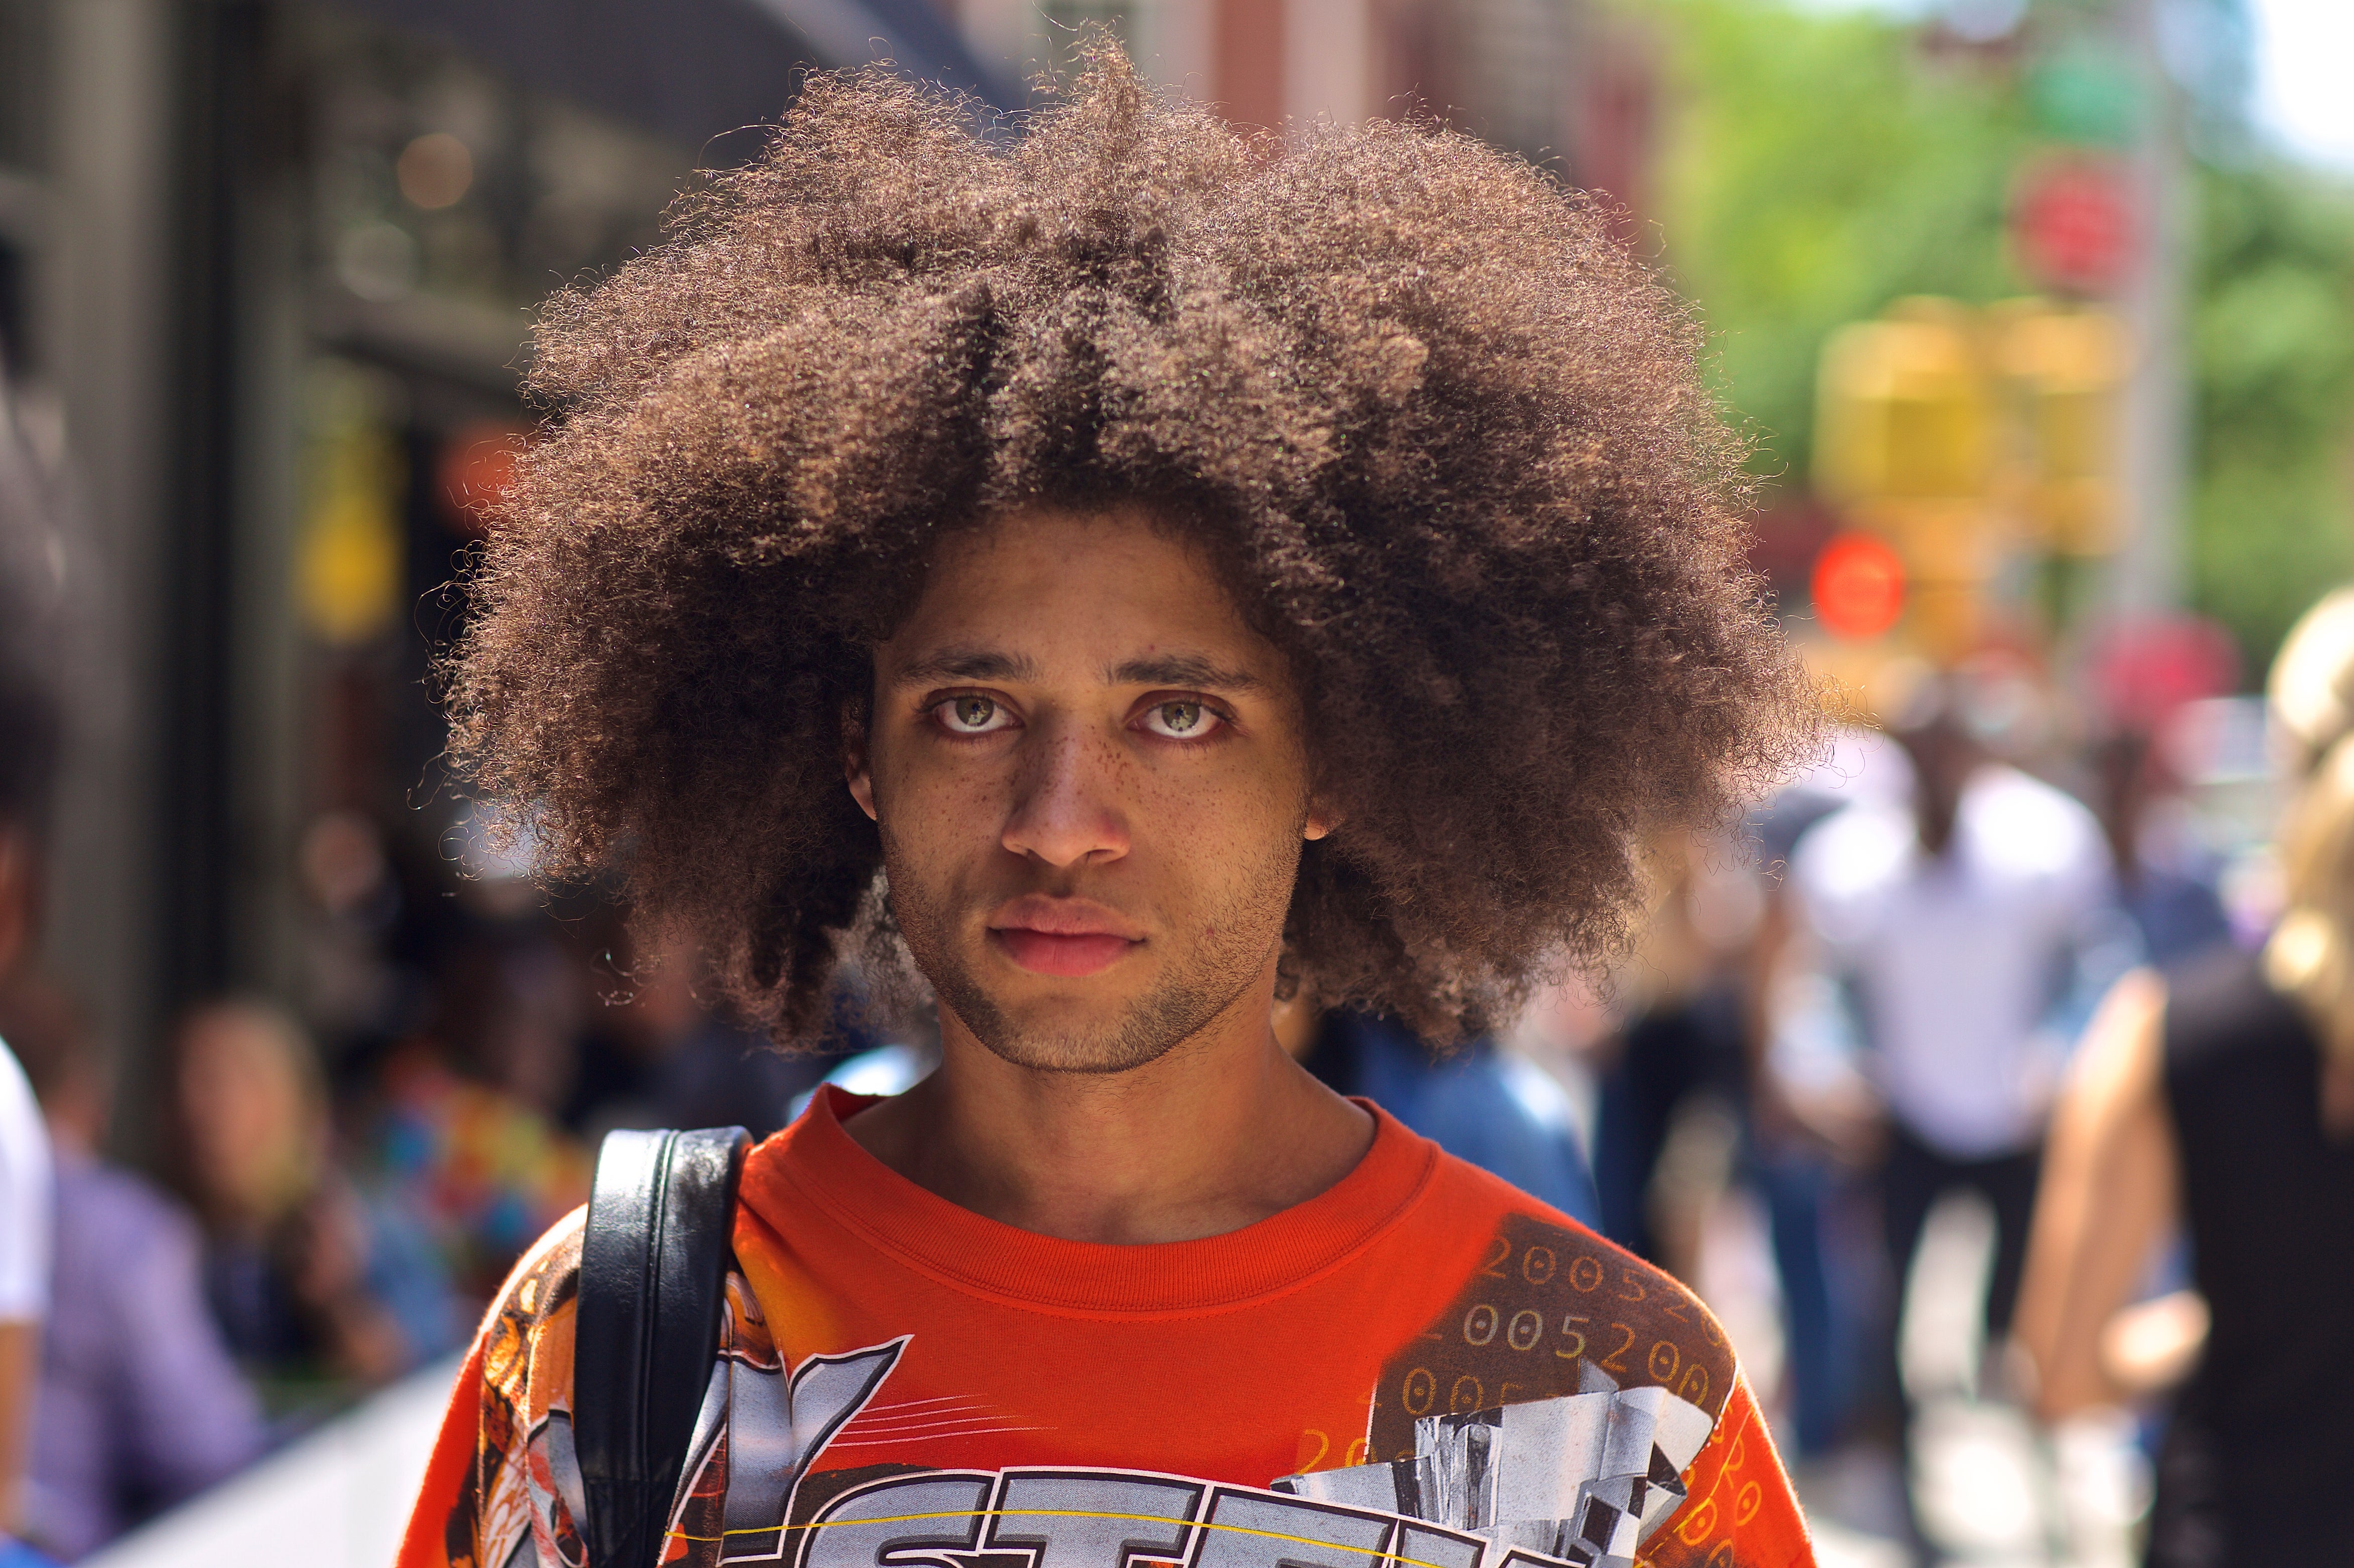 Street Style: All The Head-Turning Hairstyles at Men's New York Fashion Week
